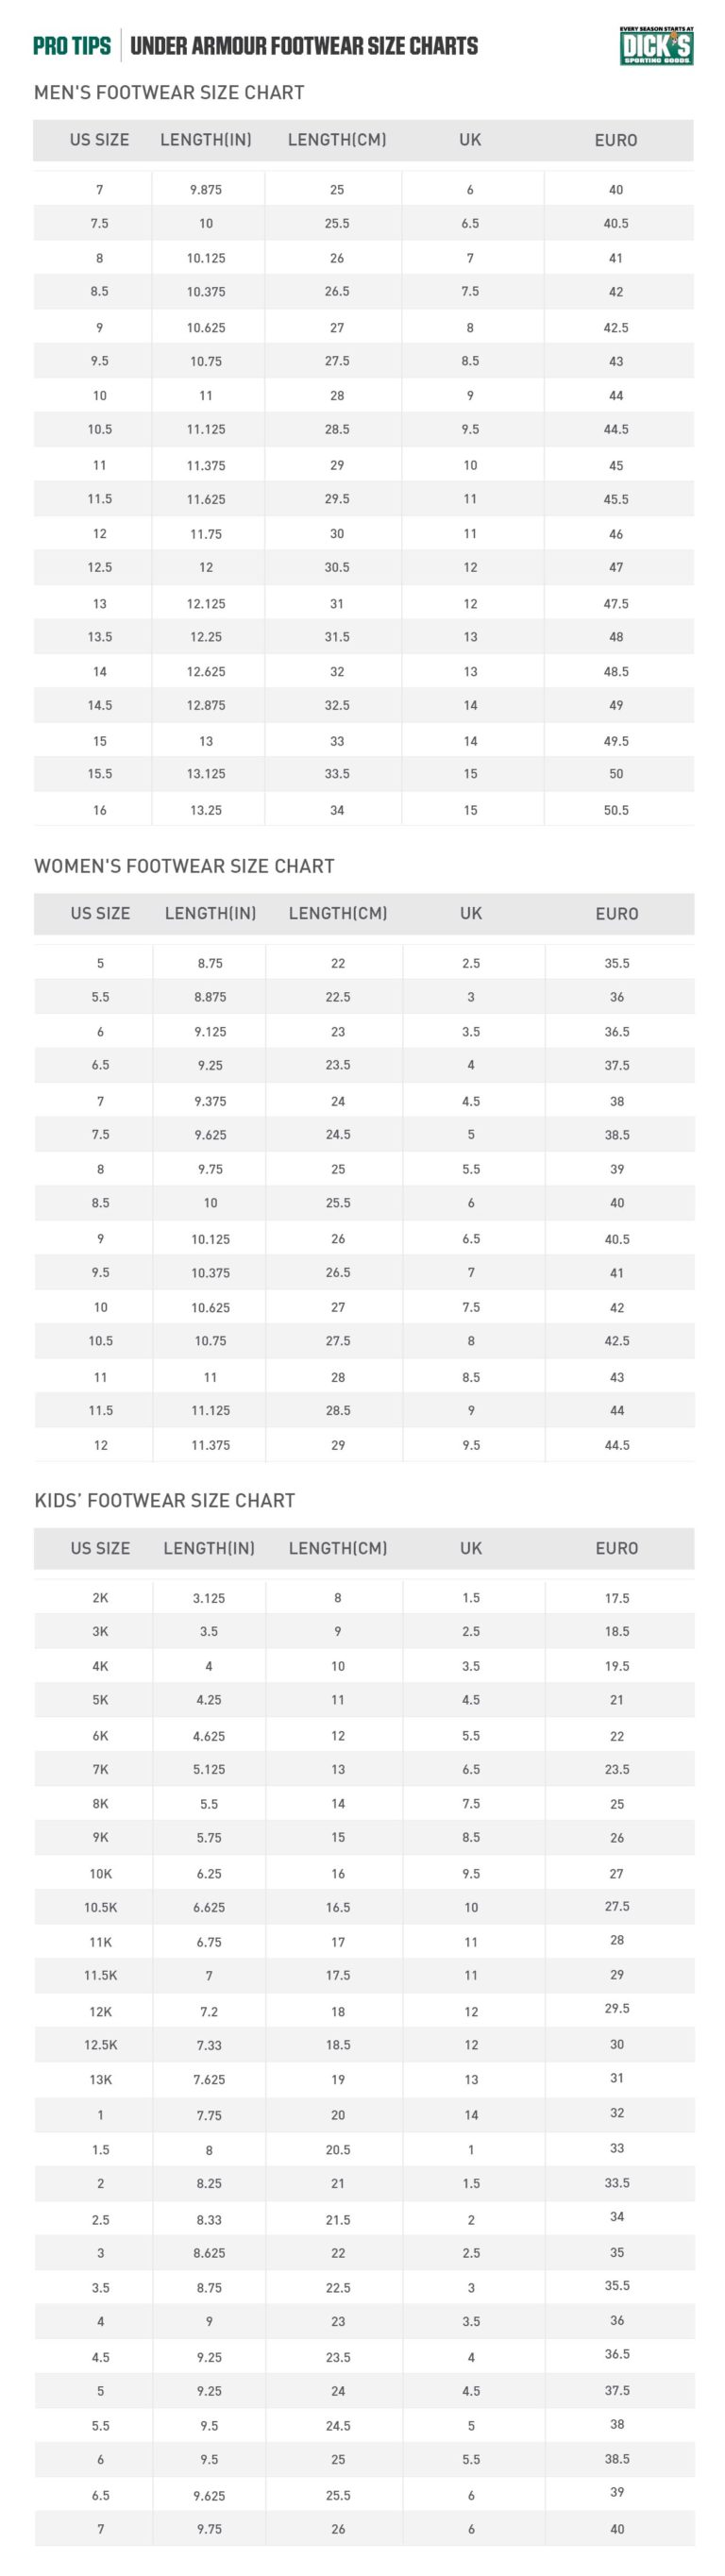 under-armour-footwear-size-charts-pro-tips-by-dick-s-sporting-goods